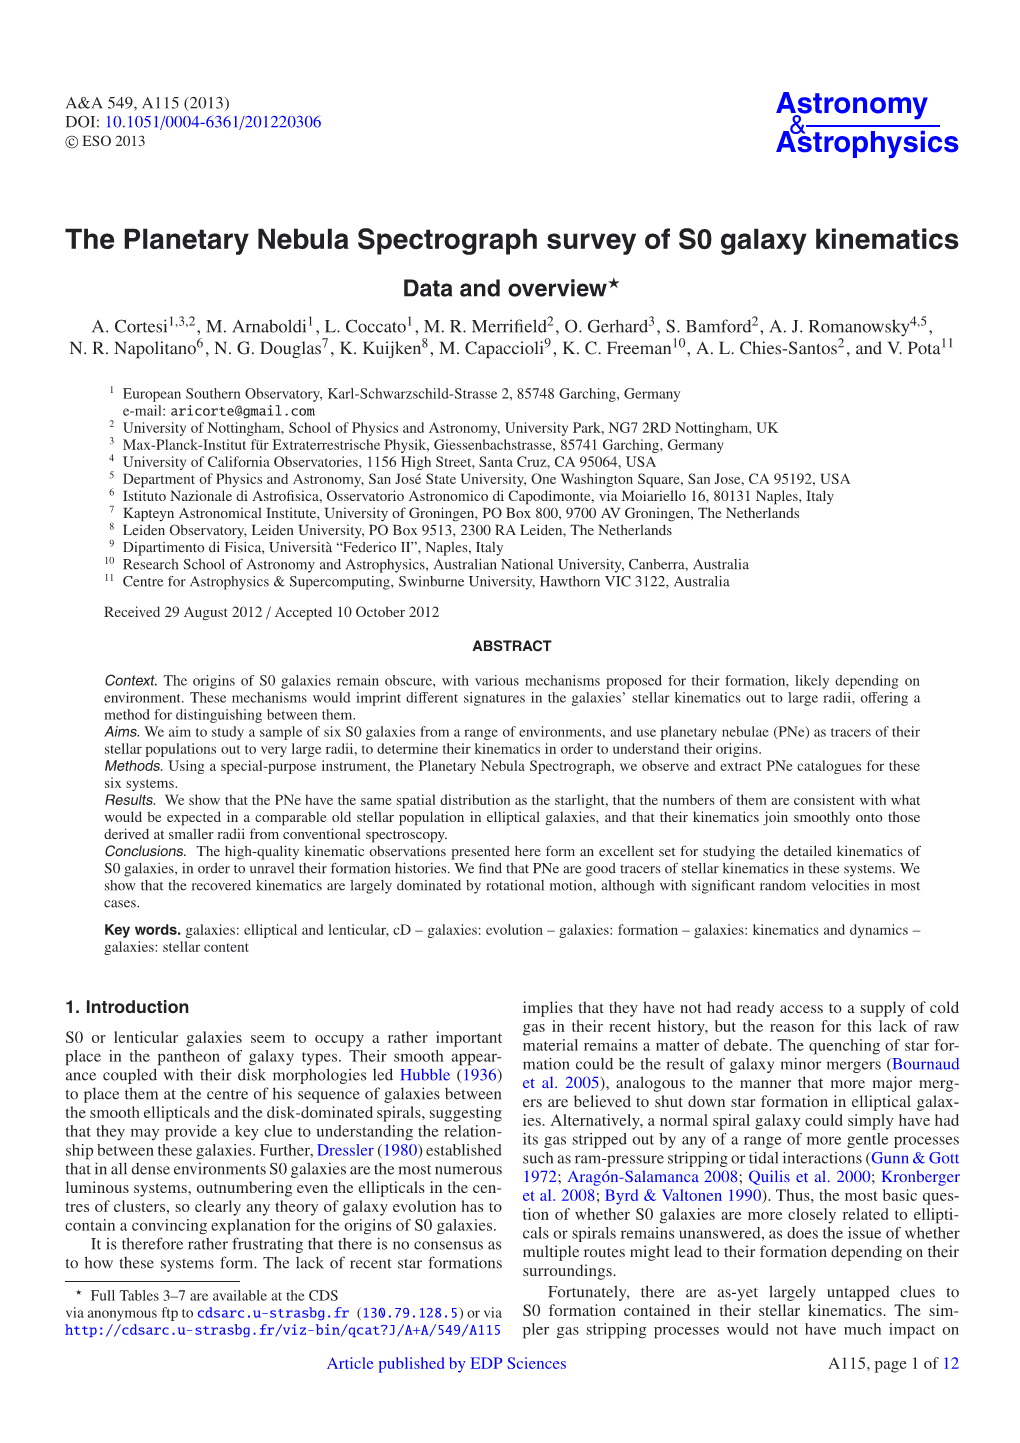 The Planetary Nebula Spectrograph Survey of S0 Galaxy Kinematics Data and Overview A